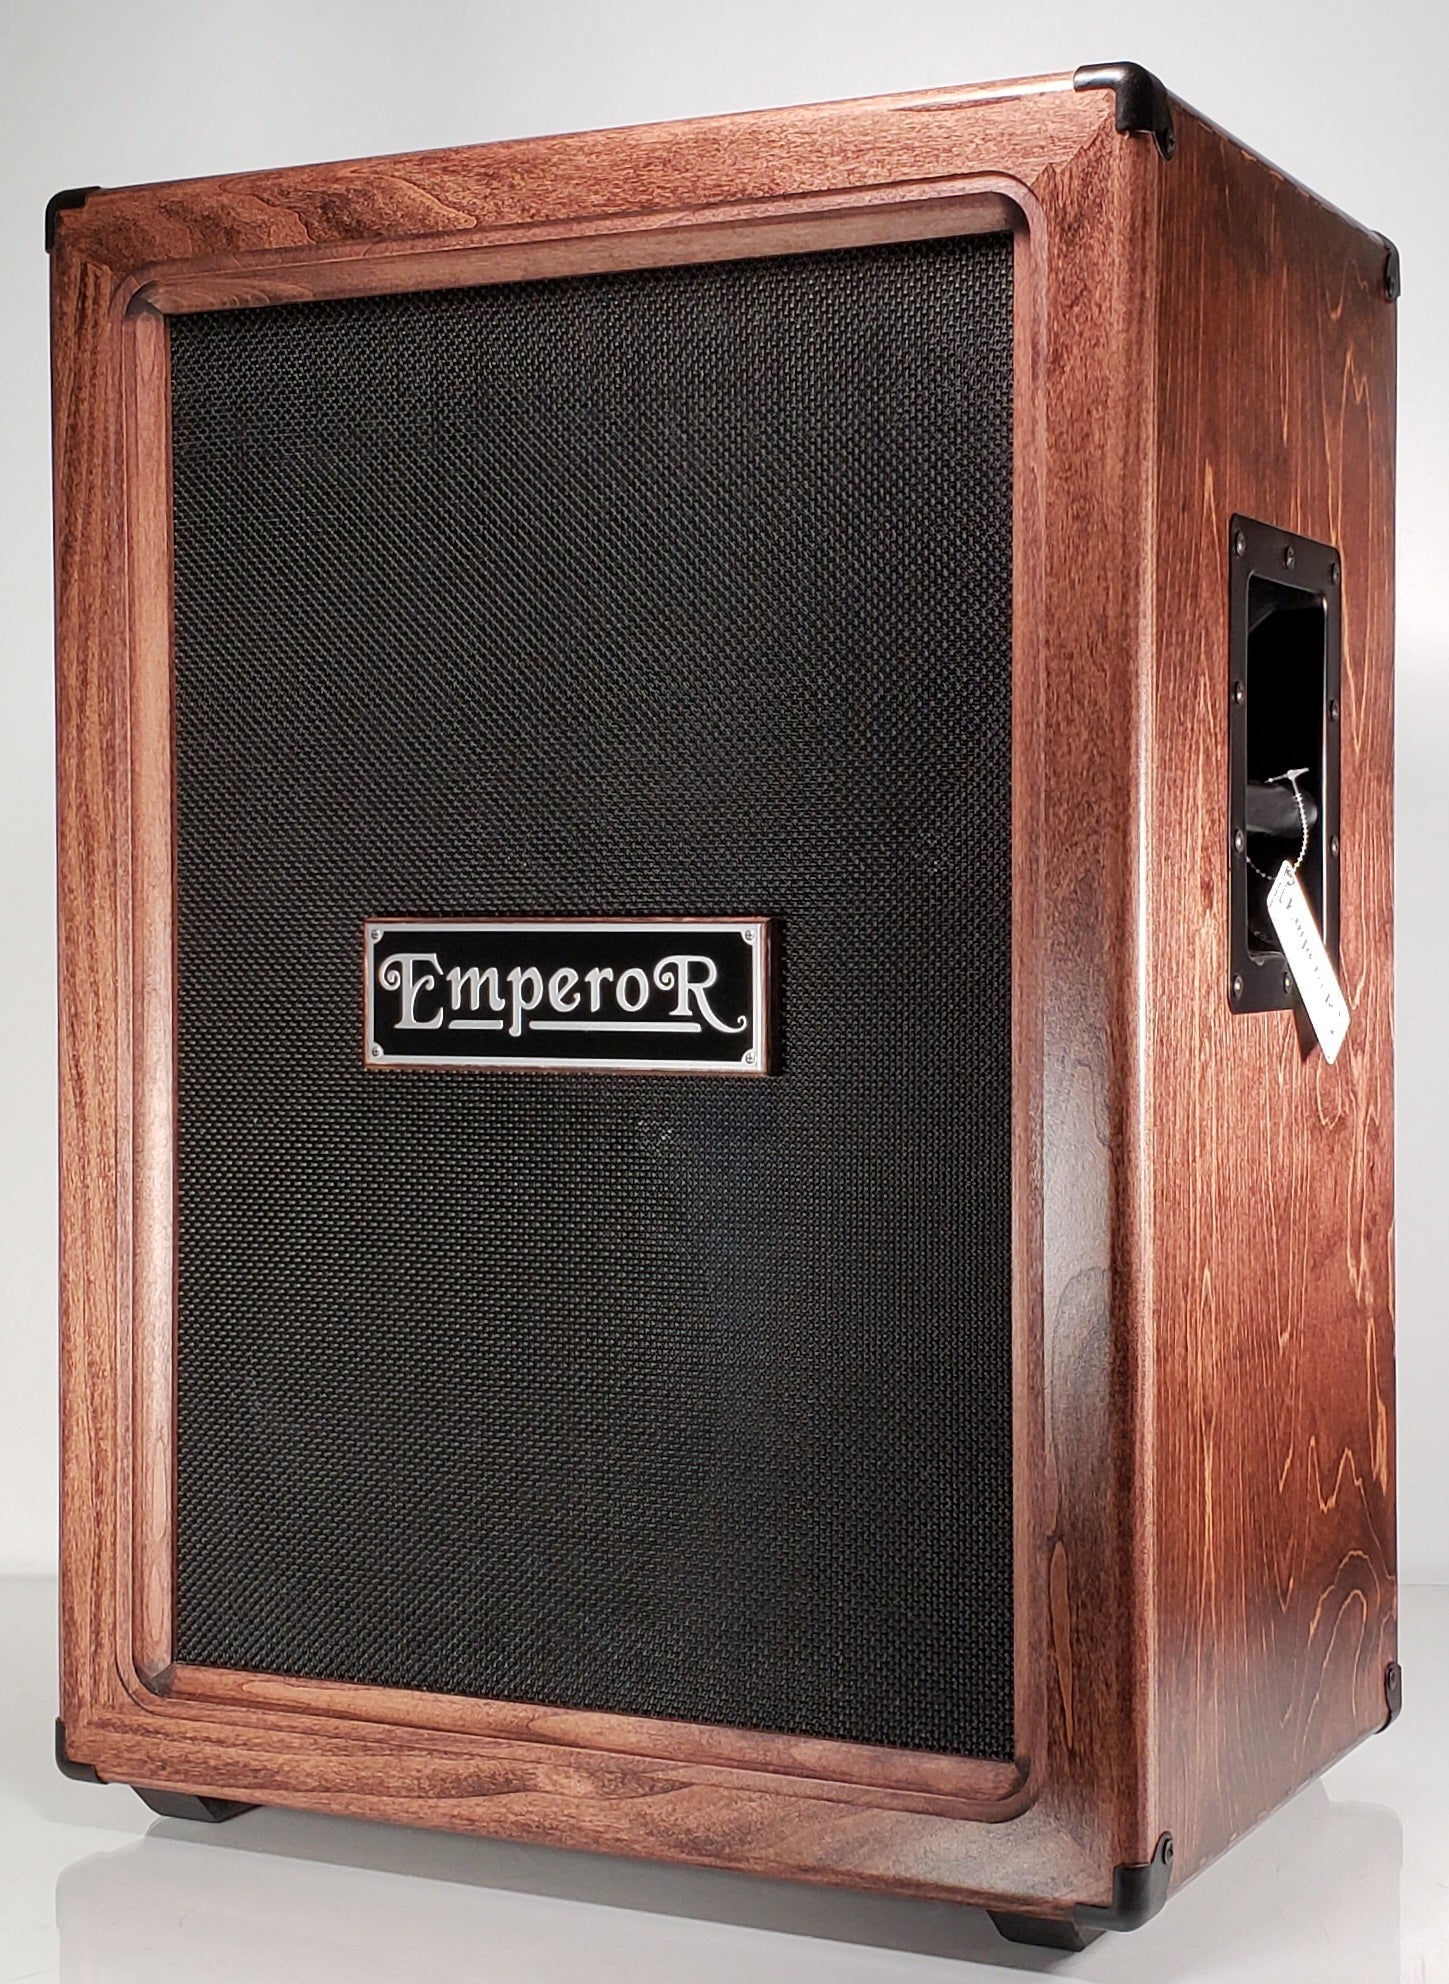 a vertical 2x12 guitar speaker cabinet made in the usa